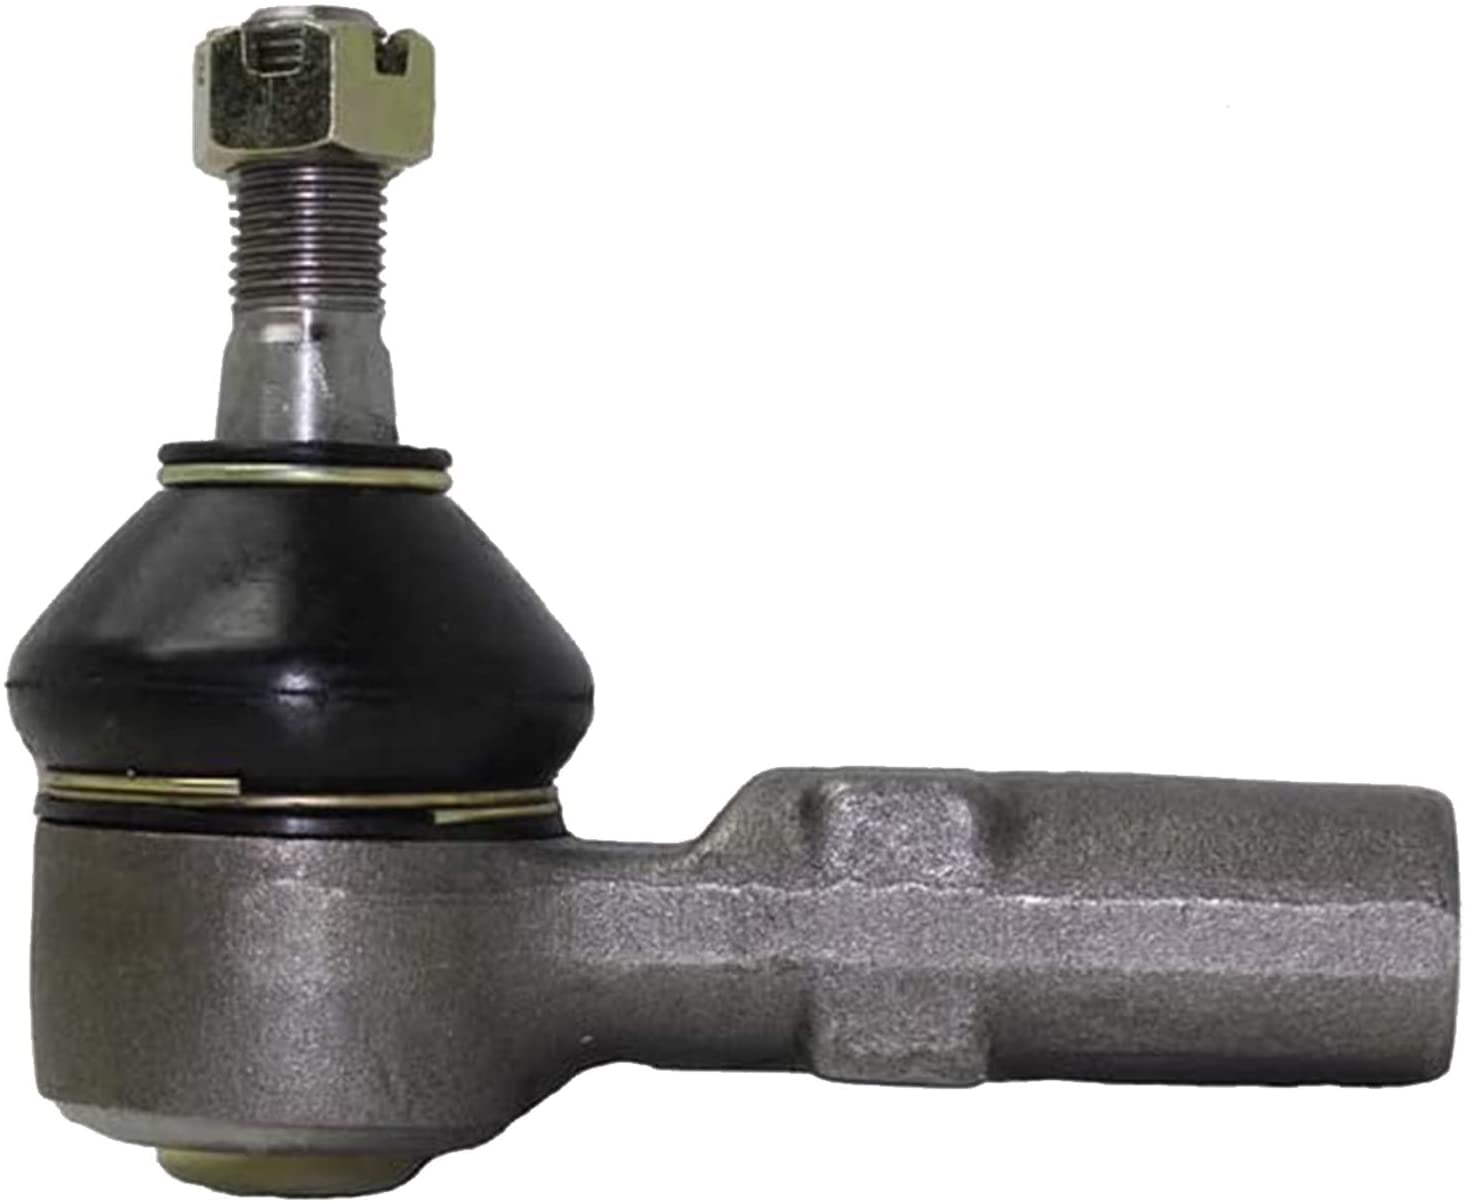 Complete Power Rack And Pinion Assembly 763A+2 Outer Tie Rod Ends Es3306